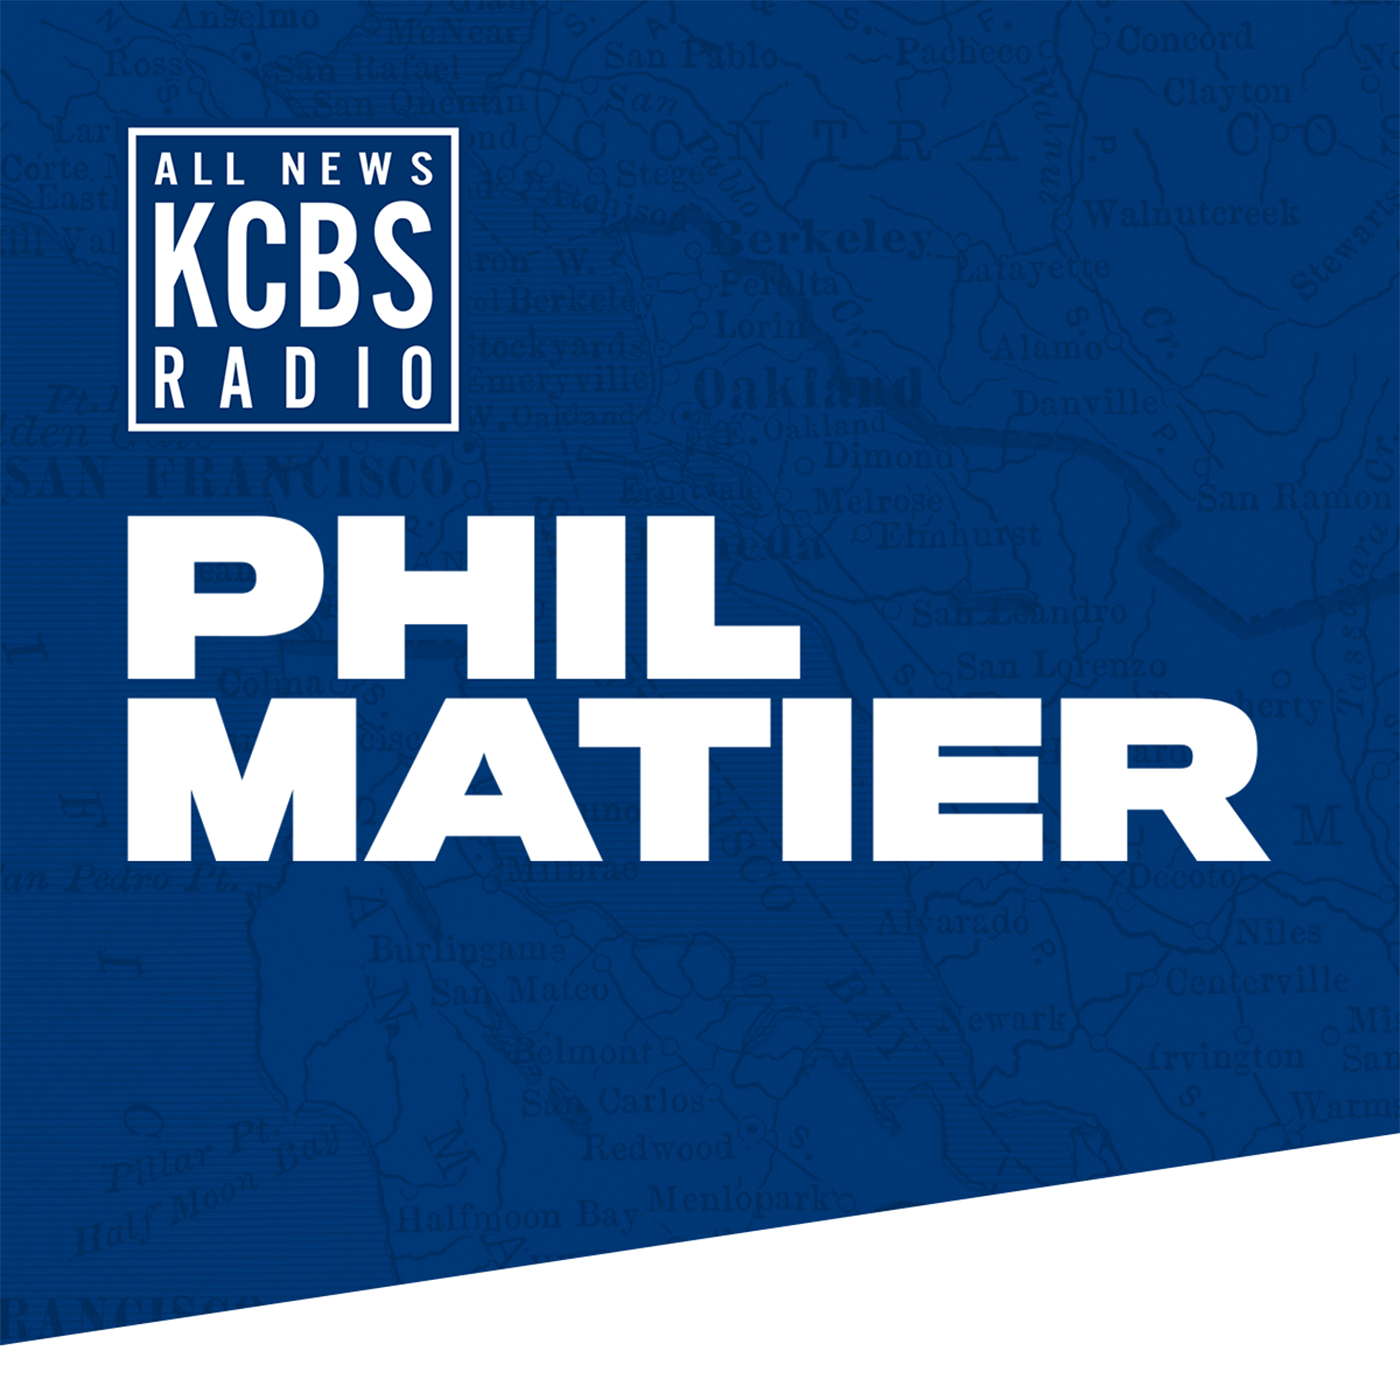 To Biden or not to Biden? That is the question for Phil Matier and Willie Brown.